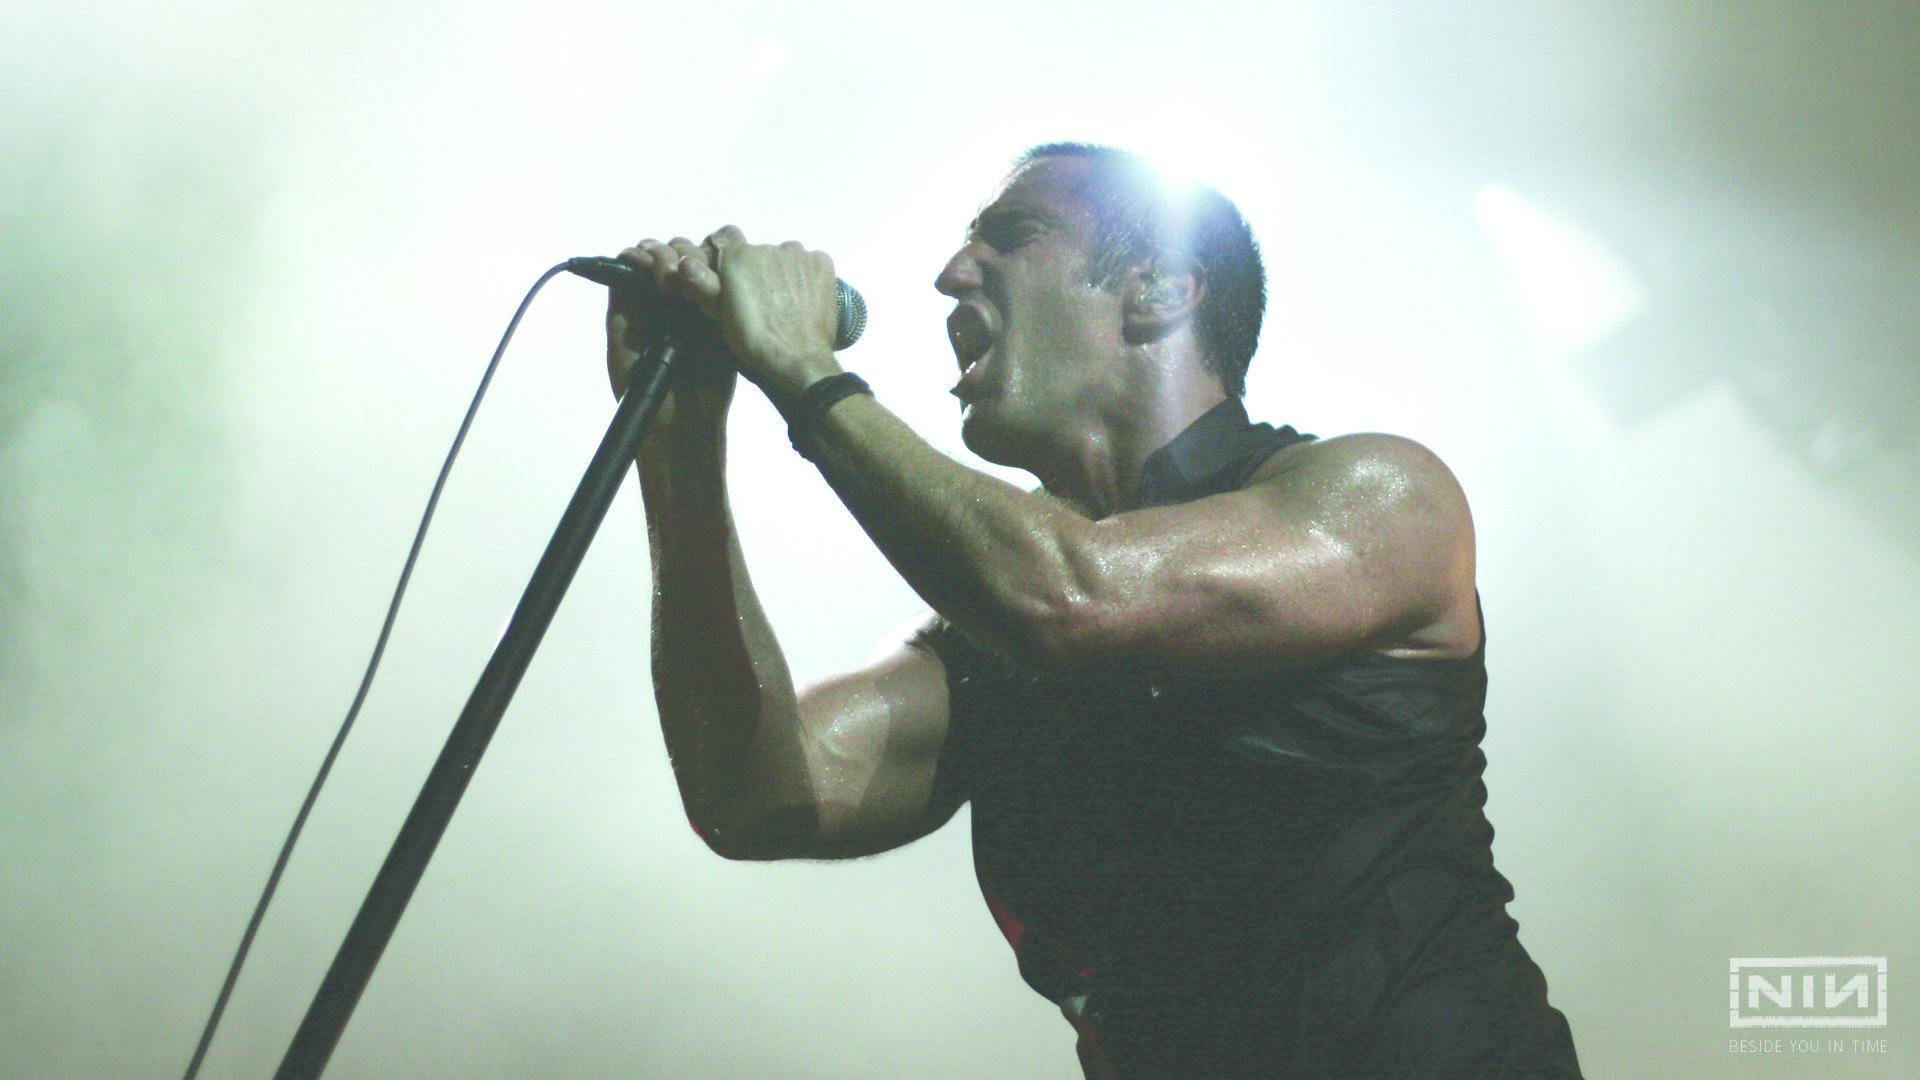 Nine Inch Nails' Trent Reznor Has Filed A Restraining Order Against His Neighbour